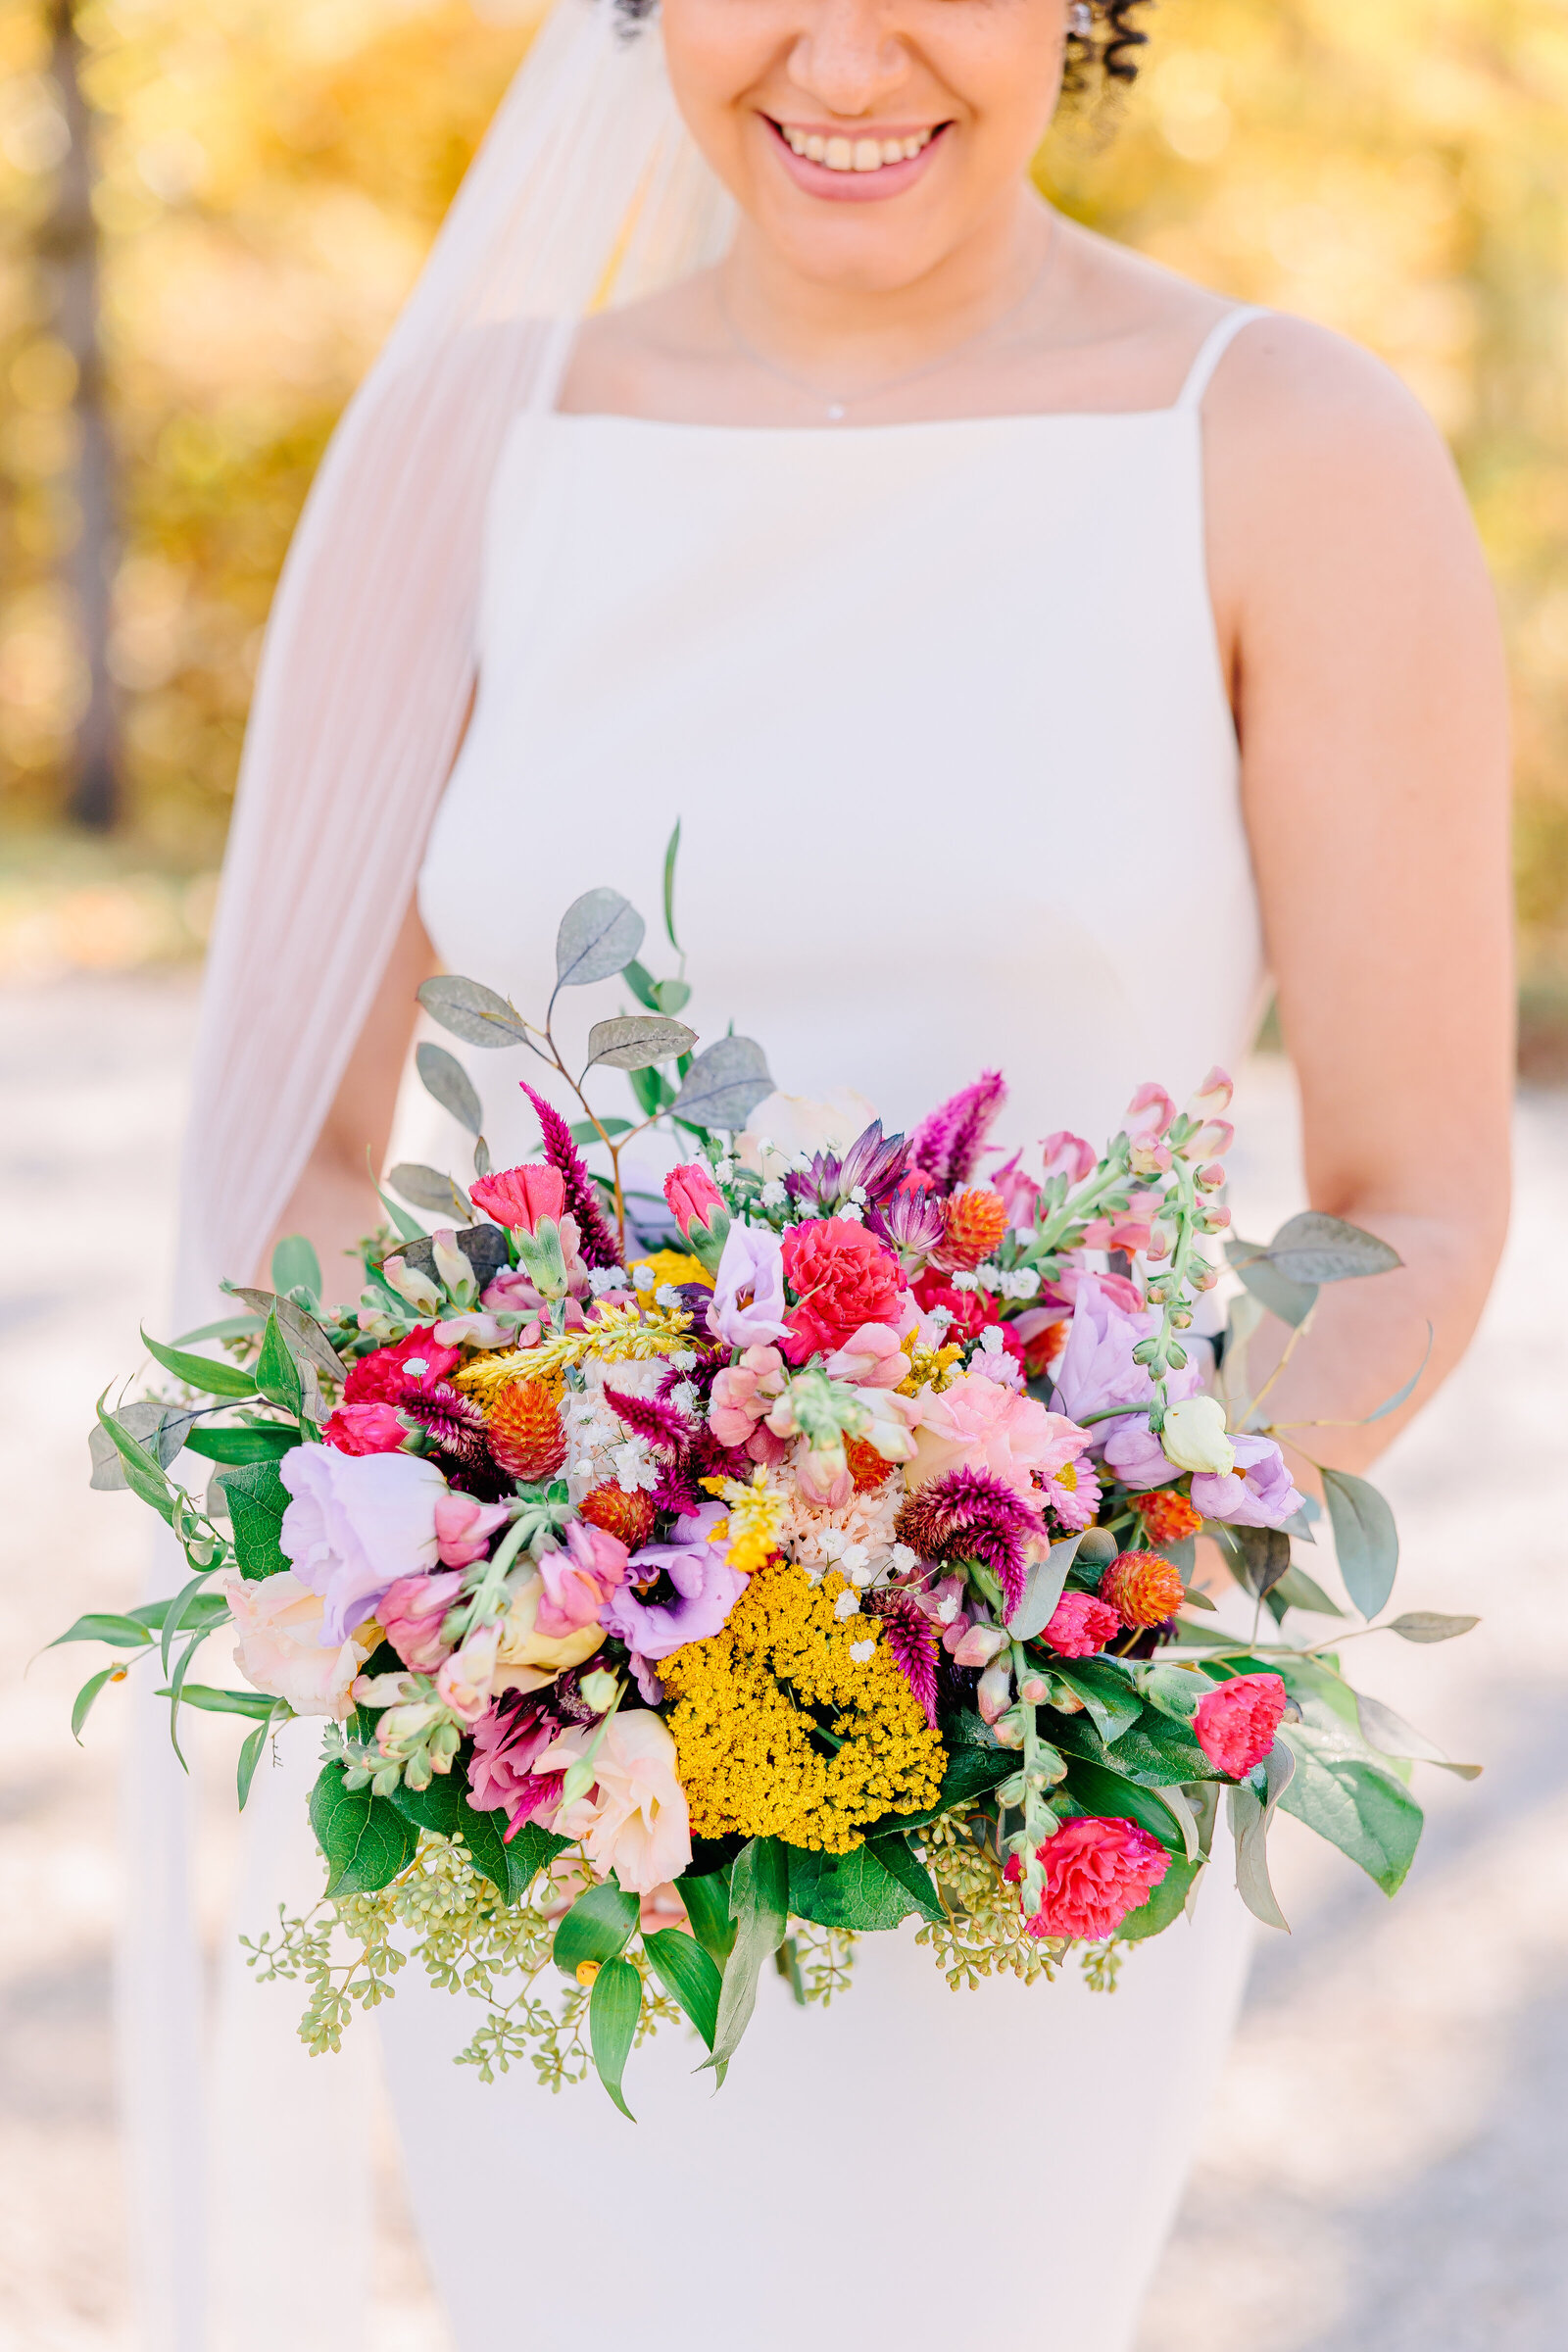 A detail photo of the white and pink blooms in a spring wedding bouquet.